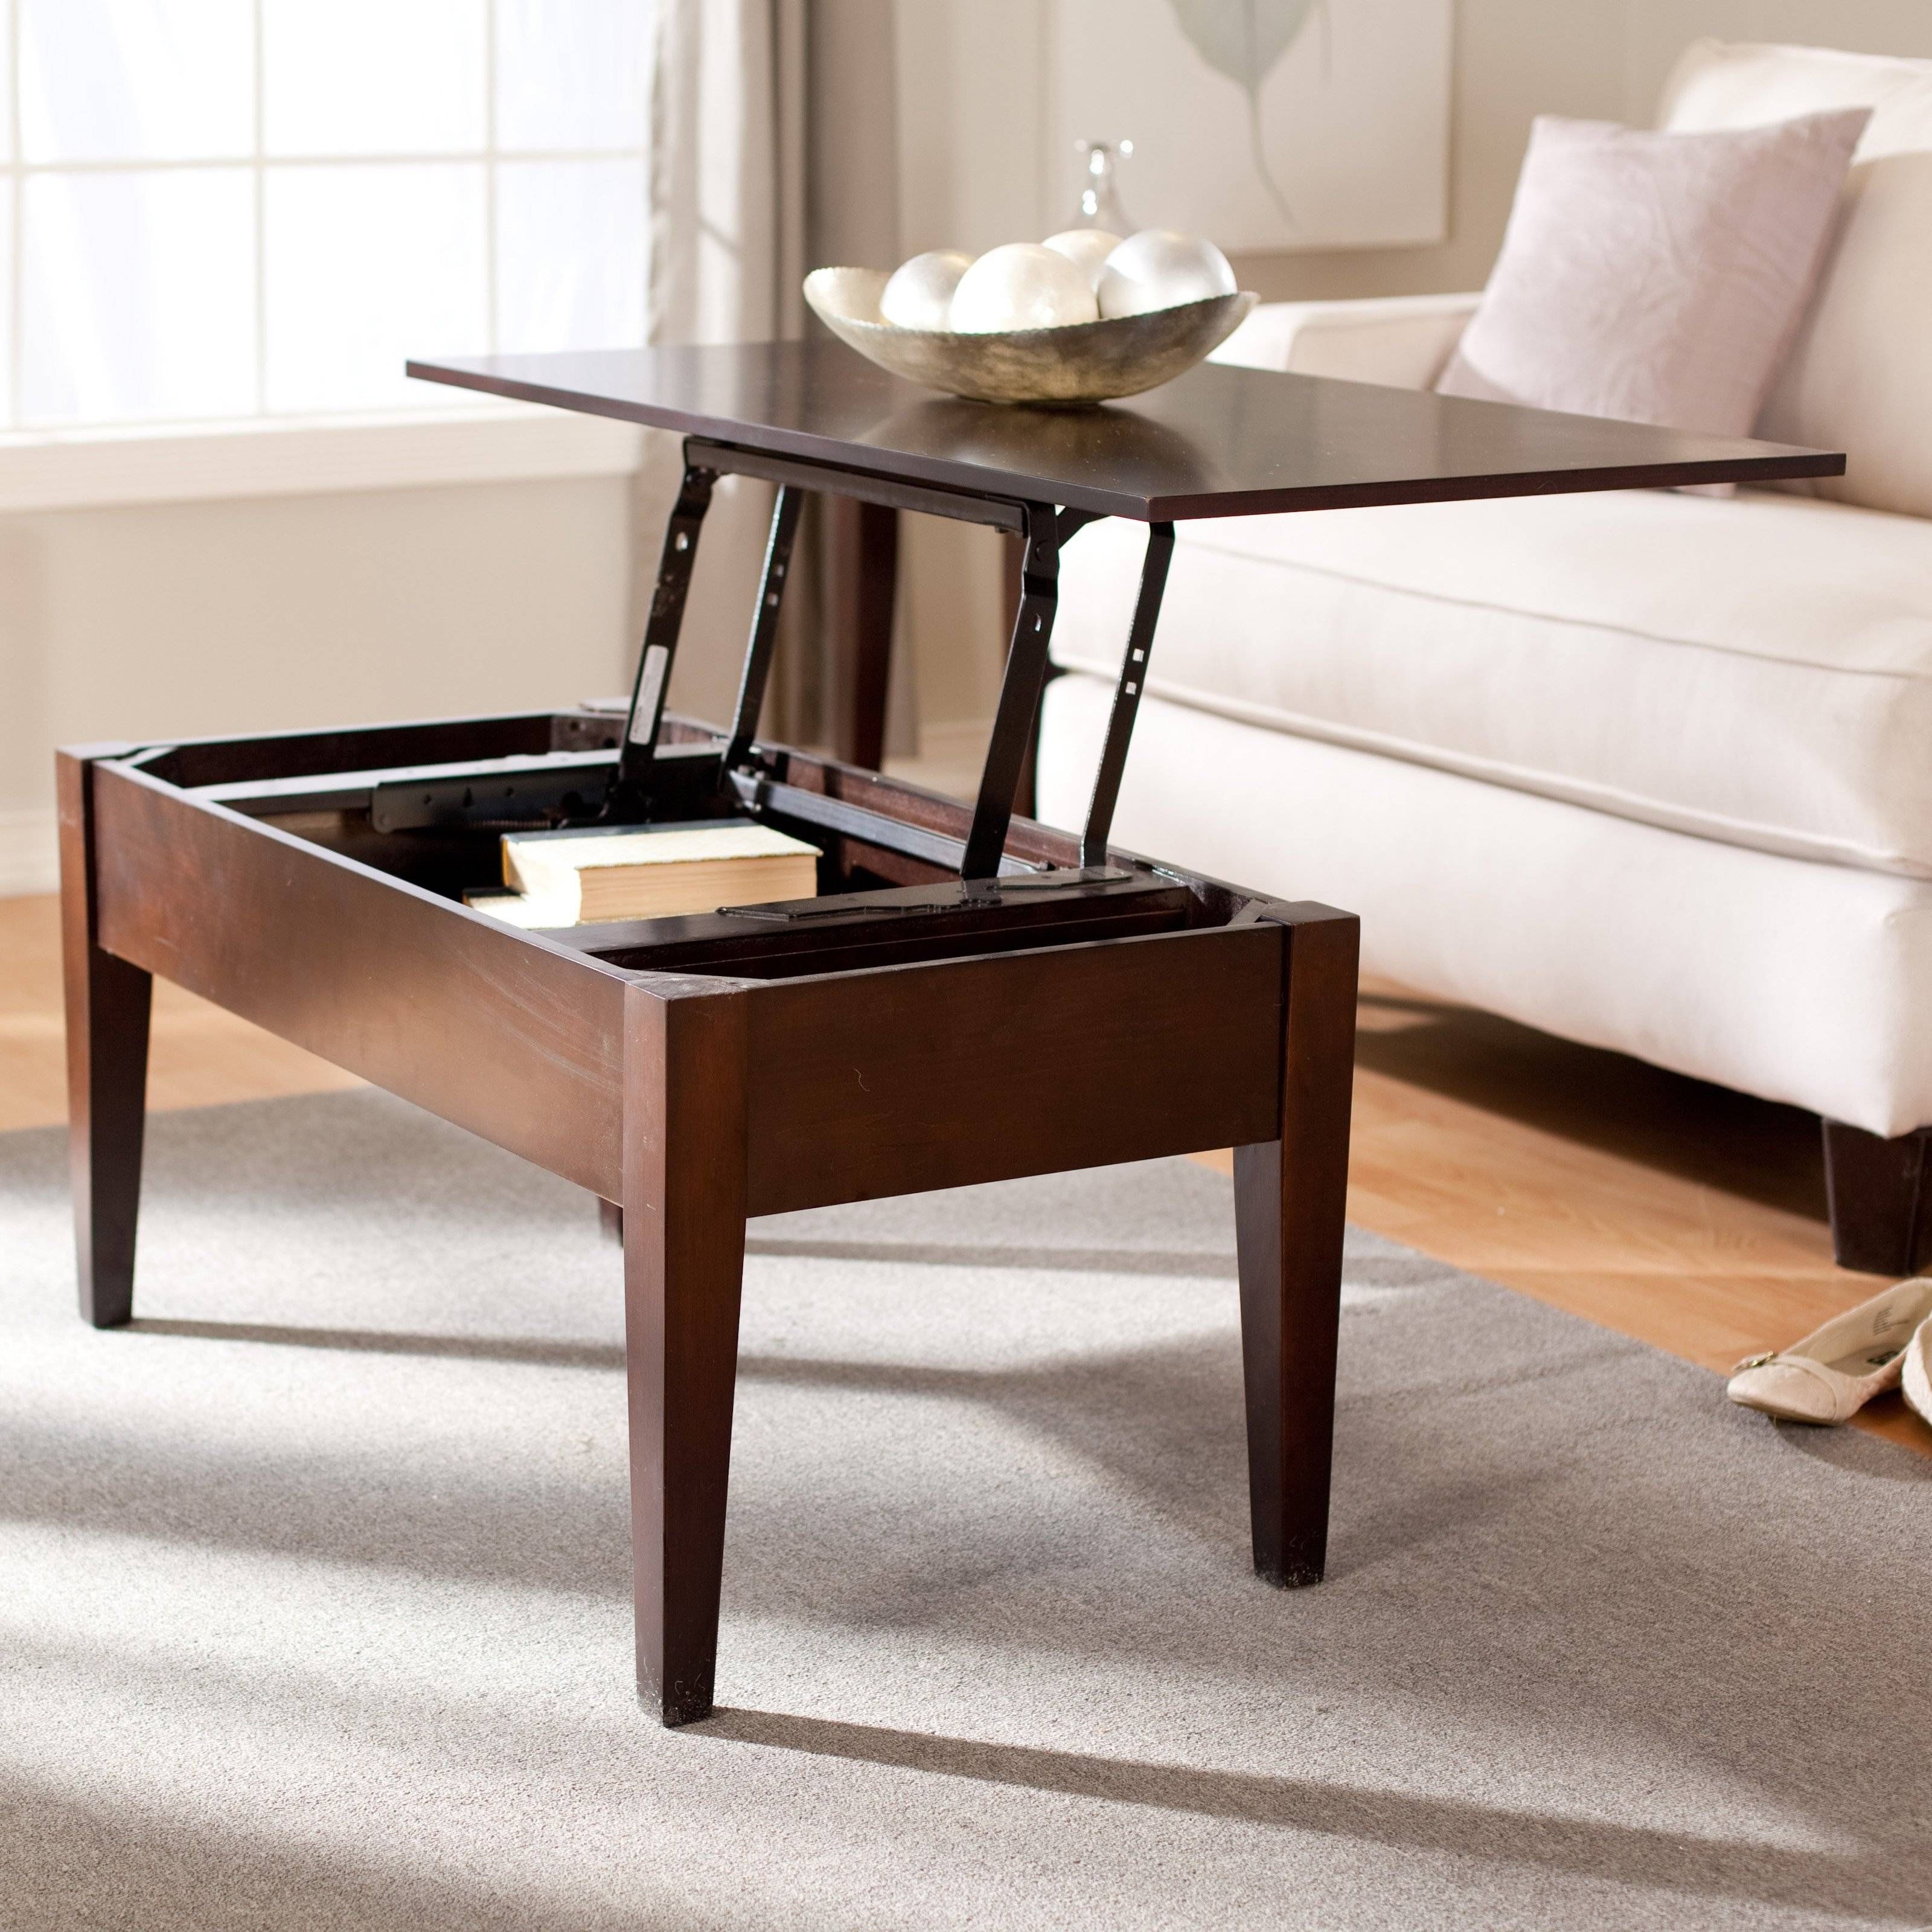 Turner Lift Top Coffee Table – Espresso | Hayneedle Regarding Lift Up Coffee Tables (View 8 of 30)